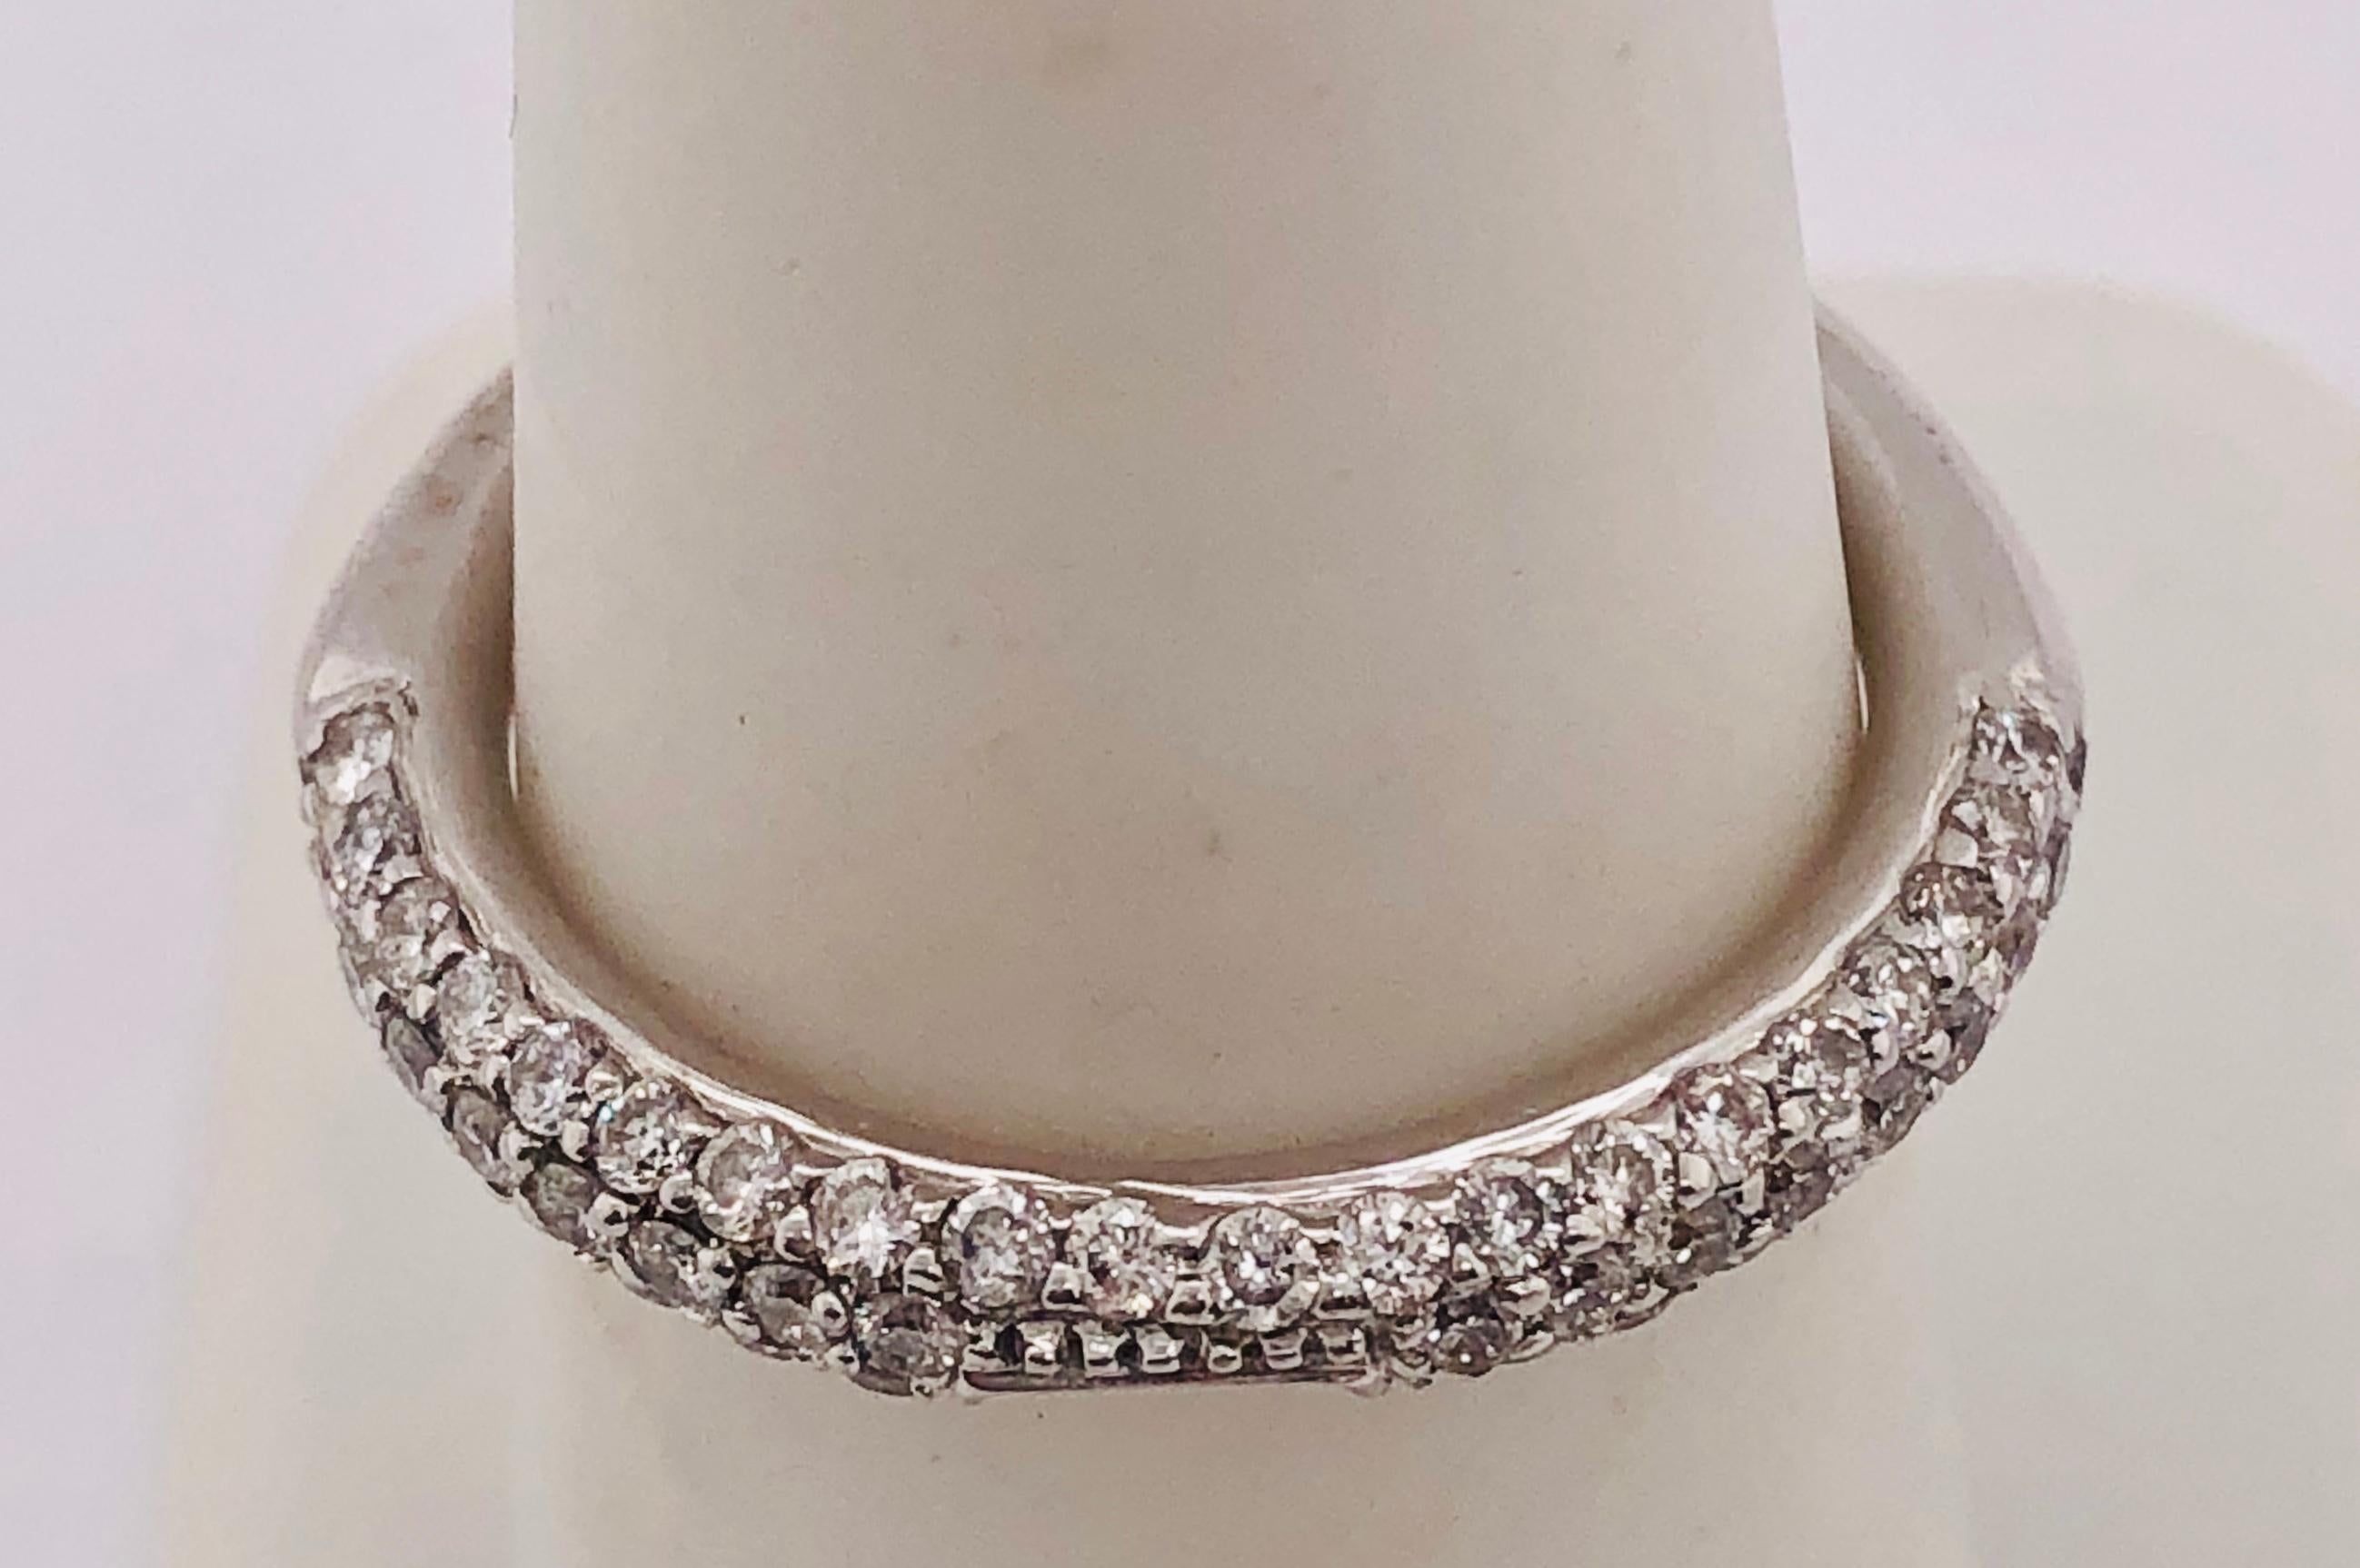 18Kt White Gold Band Ring with Diamonds
Size 7 with 4.19 grams total weight